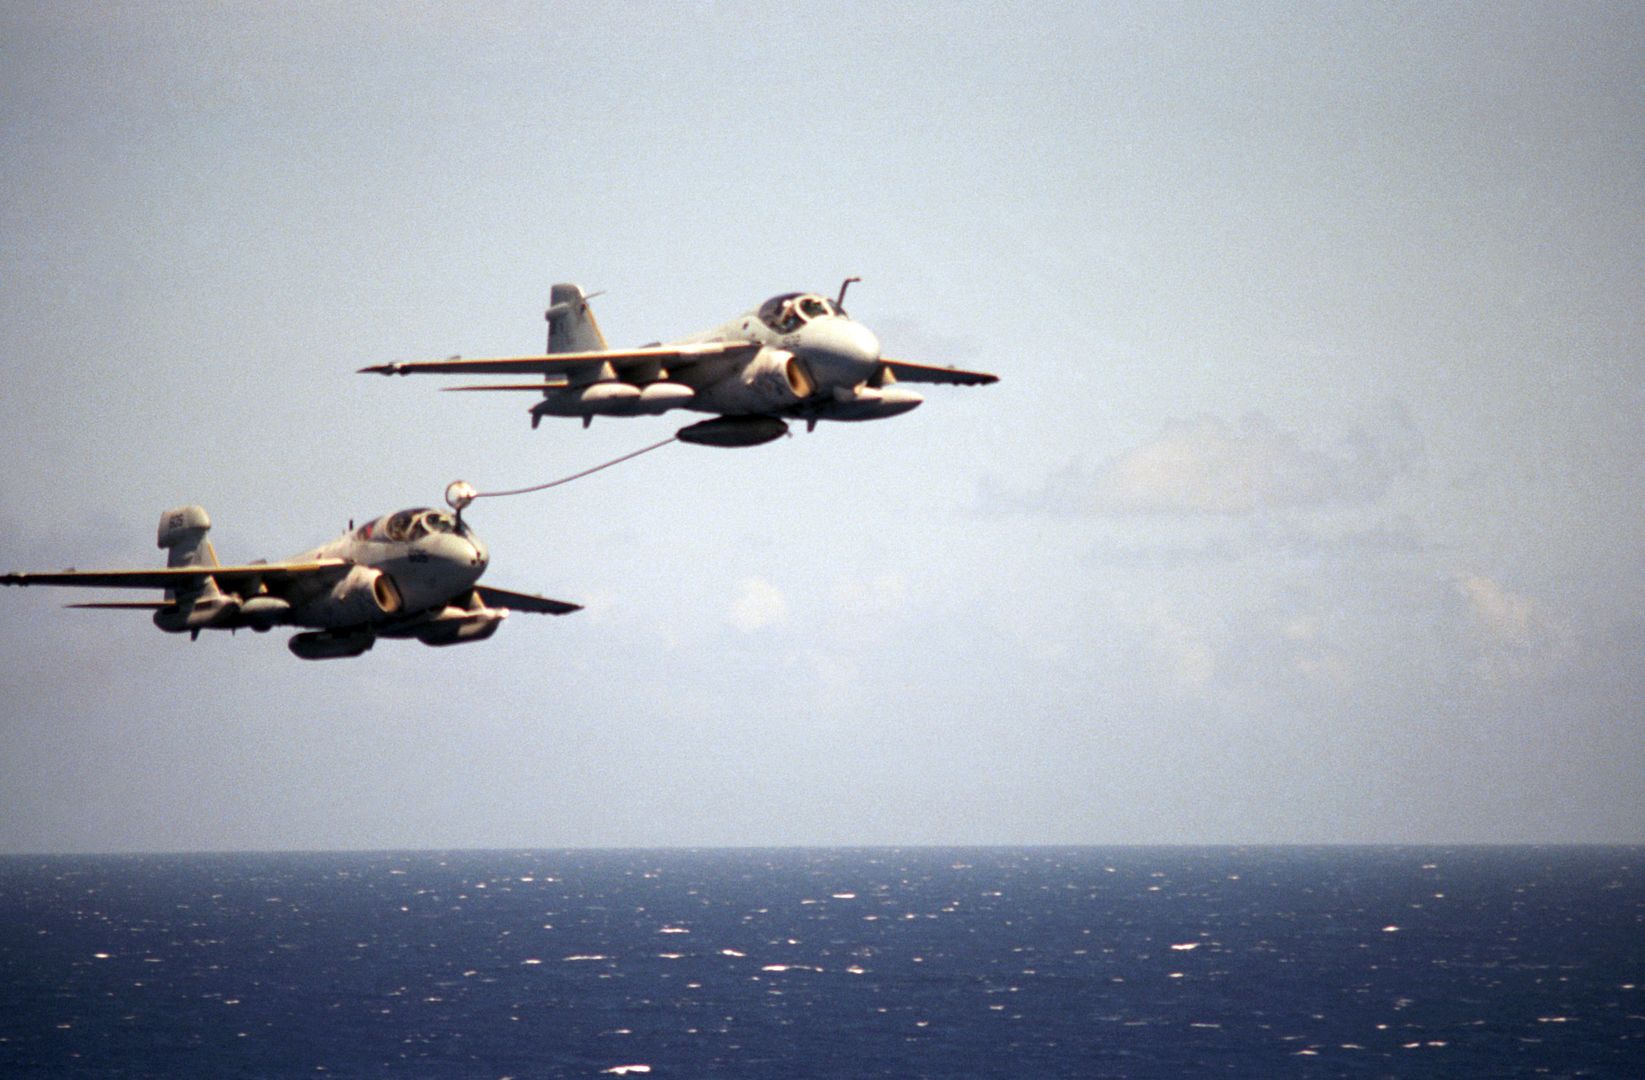 A Right Front View Of An A 6E Intruder Aircraft Refueling An EA 6B Prowler Aircraft During An Air Power Demonstration By The Air Wing Of The Nuclear Powered Aircraft Carrier USS CARL VINSON